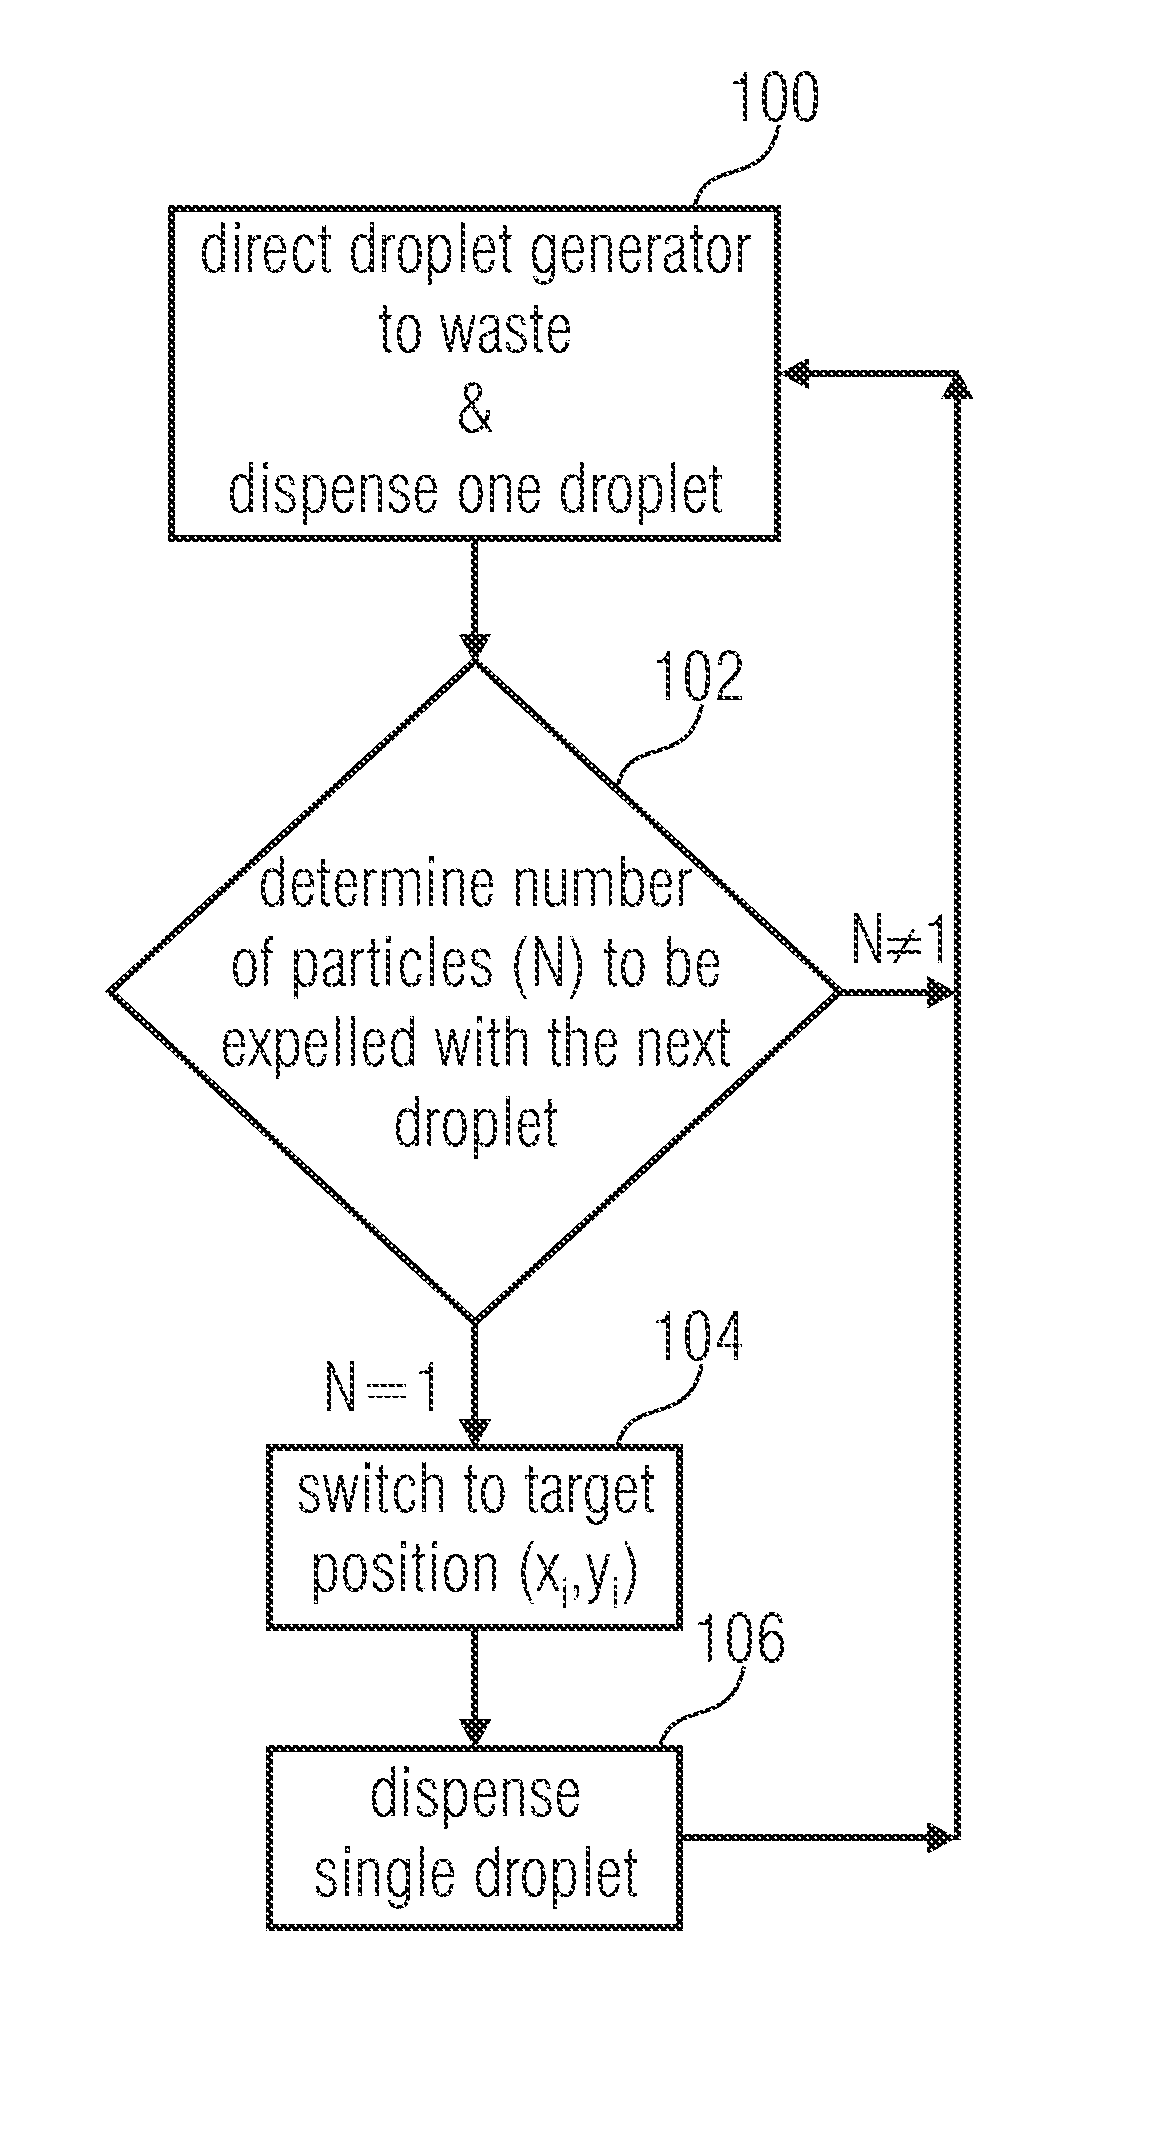 Apparatus and method for dispensing cells or particles confined in a free flying droplet